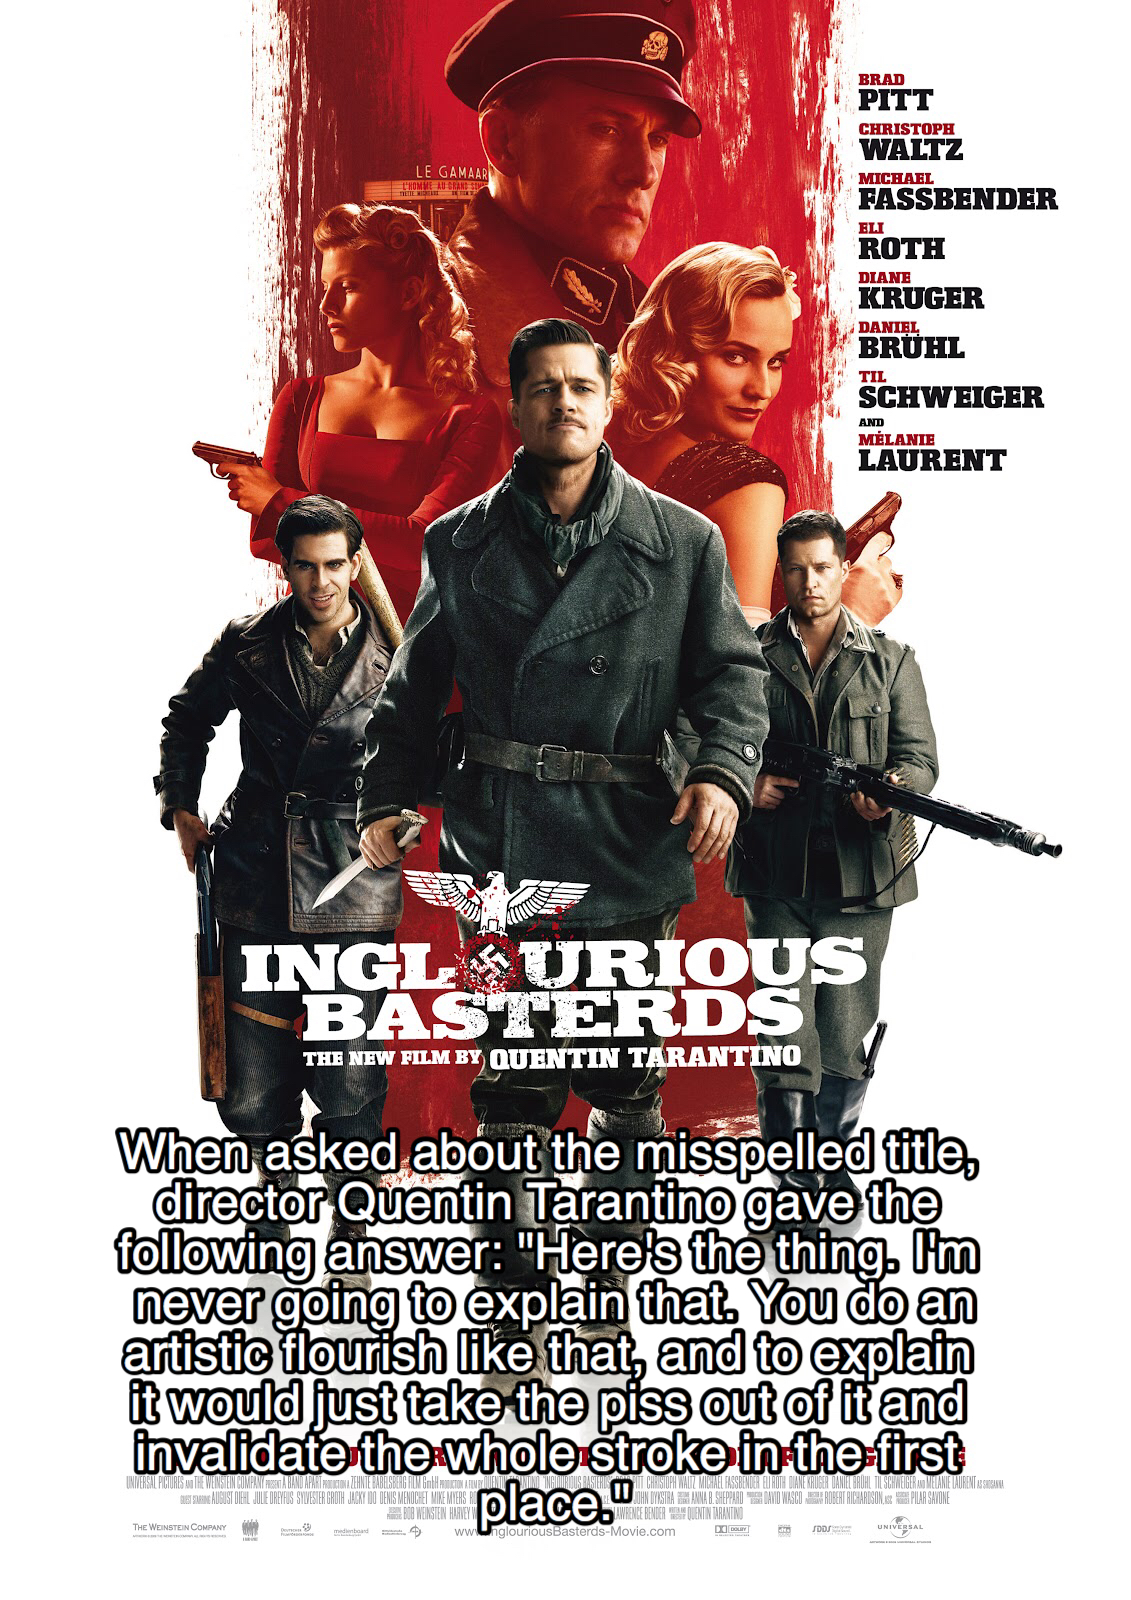 Waltz Fassbender Roth Kruger Bruhl Schweiger Laurent Inglurious Basterds The New Filmiy Quentin Tarantino When asked about the misspelled title, director Quentin Tarantino gave the ing answer "Here's the thing. I'm never going to explain that. You do an…